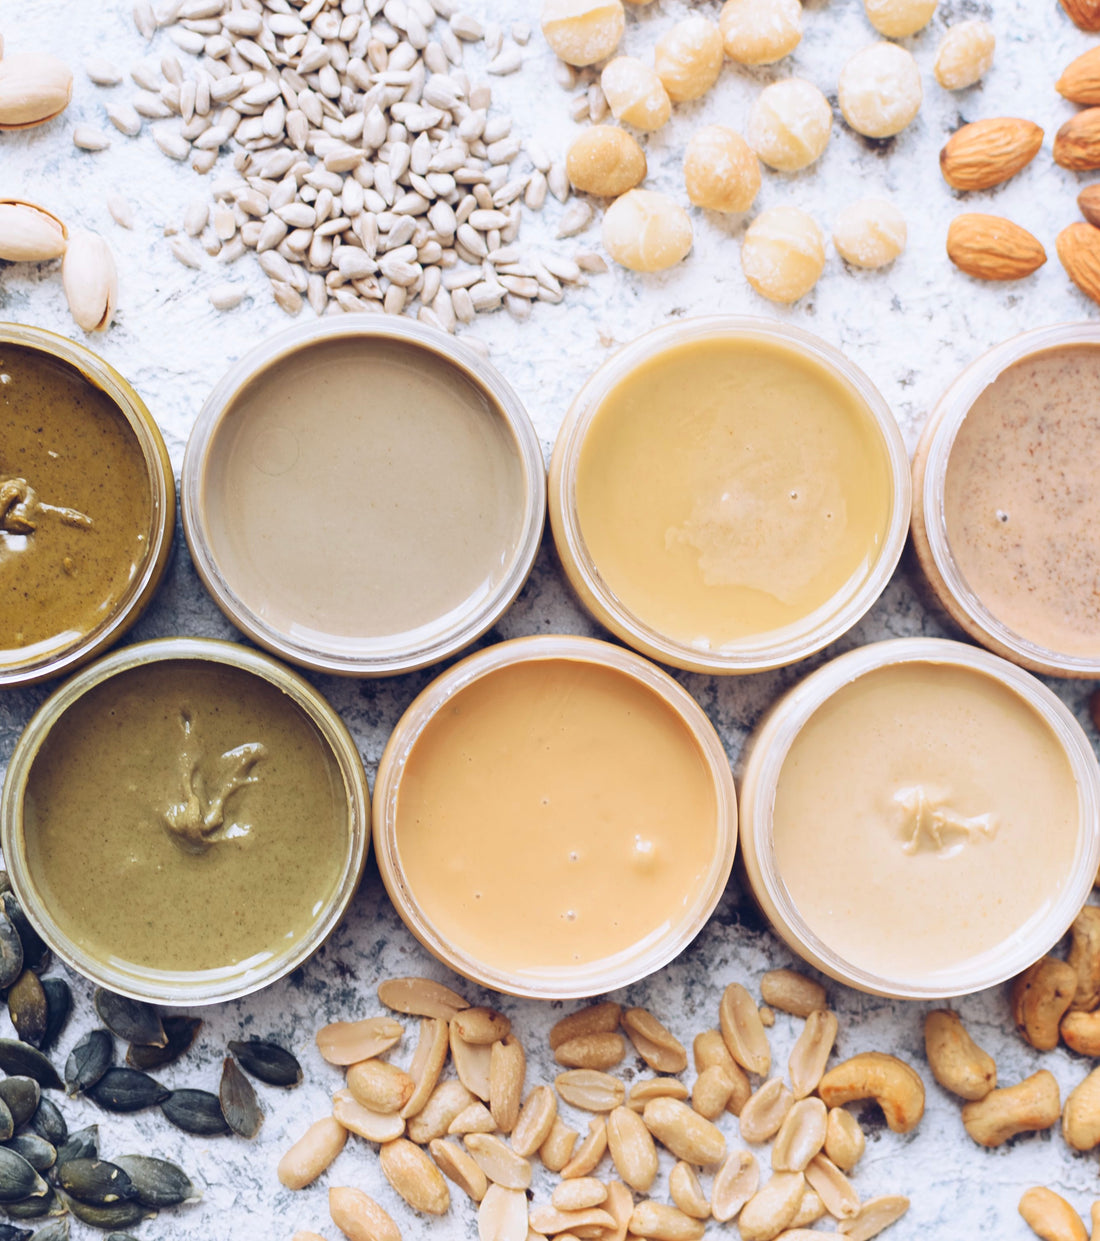 Adding nut and seed butters to your blends?